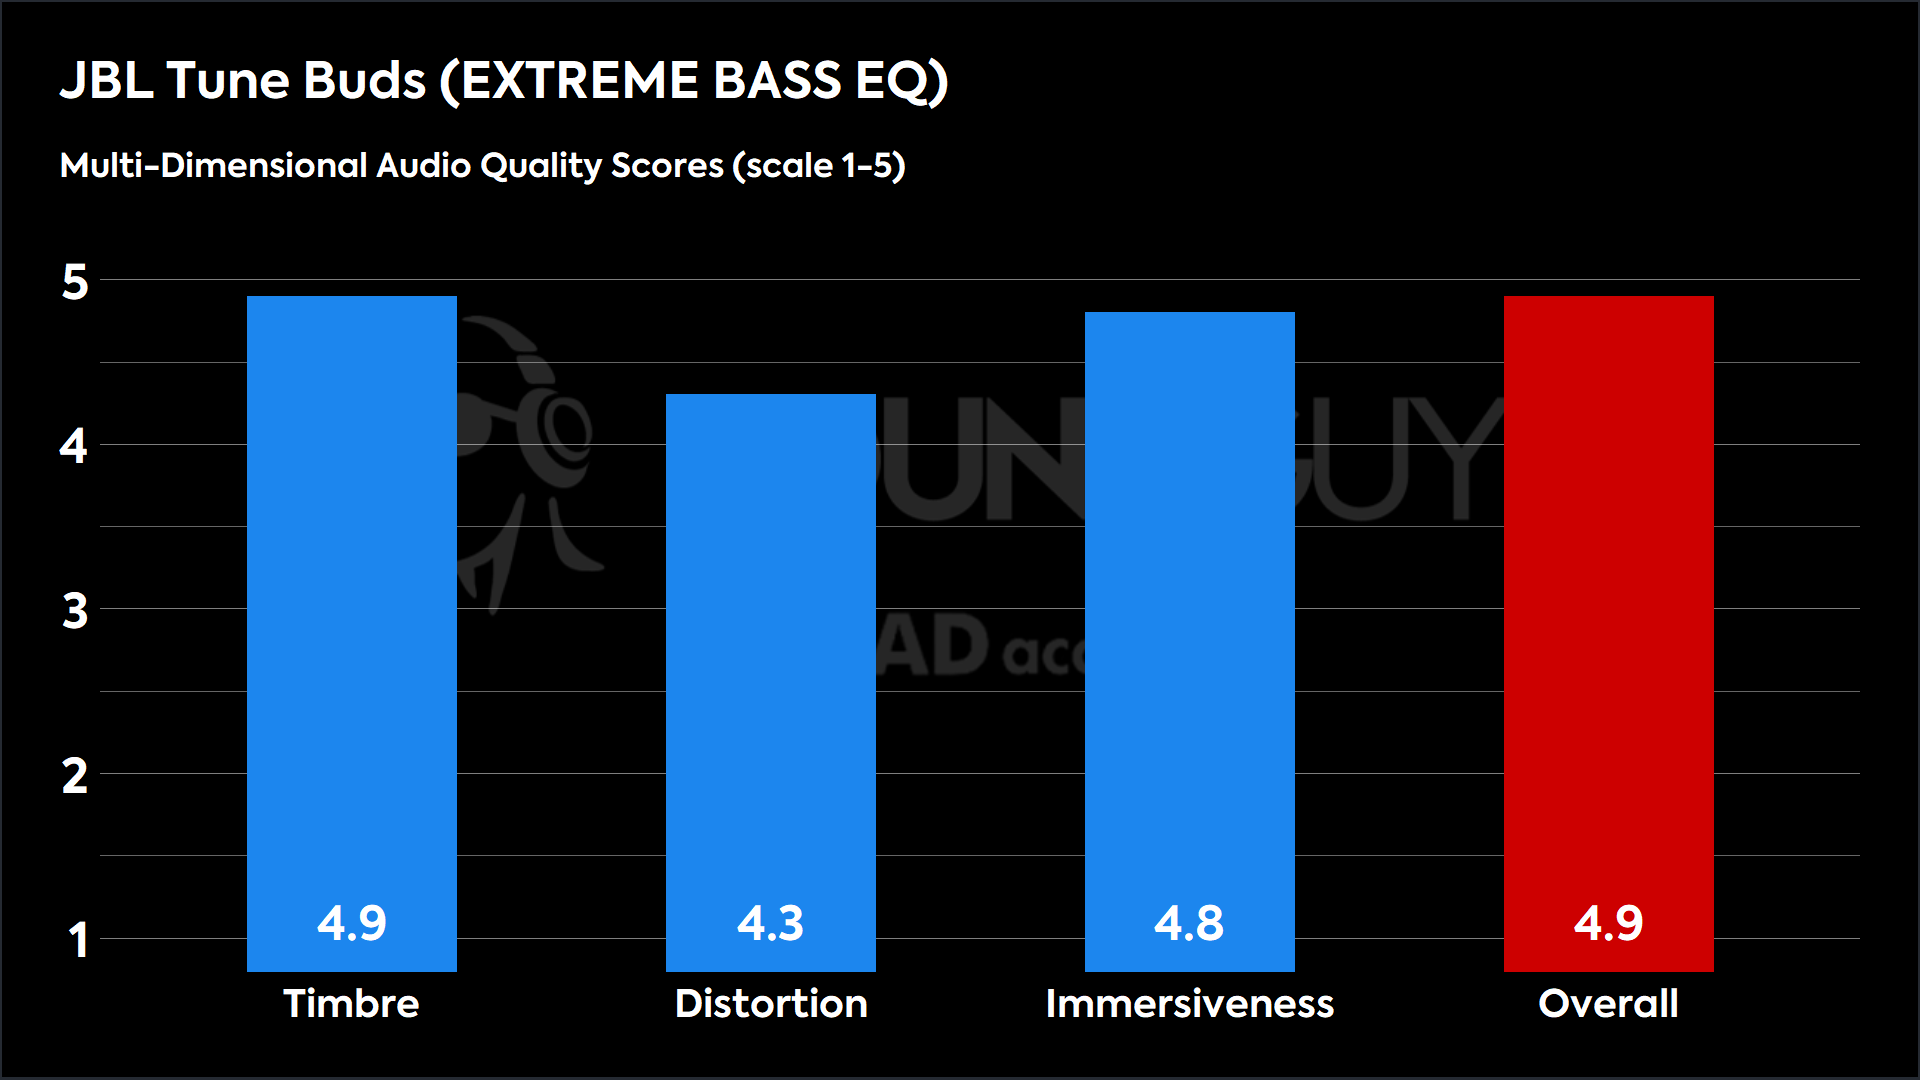 This chart shows the MDAQS results for the JBL Tune Buds in EXTREME BASS EQ mode. The Timbre score is 4.9, The Distortion score is 4.3, the Immersiveness score is 4.8, and the Overall Score is 4.9).